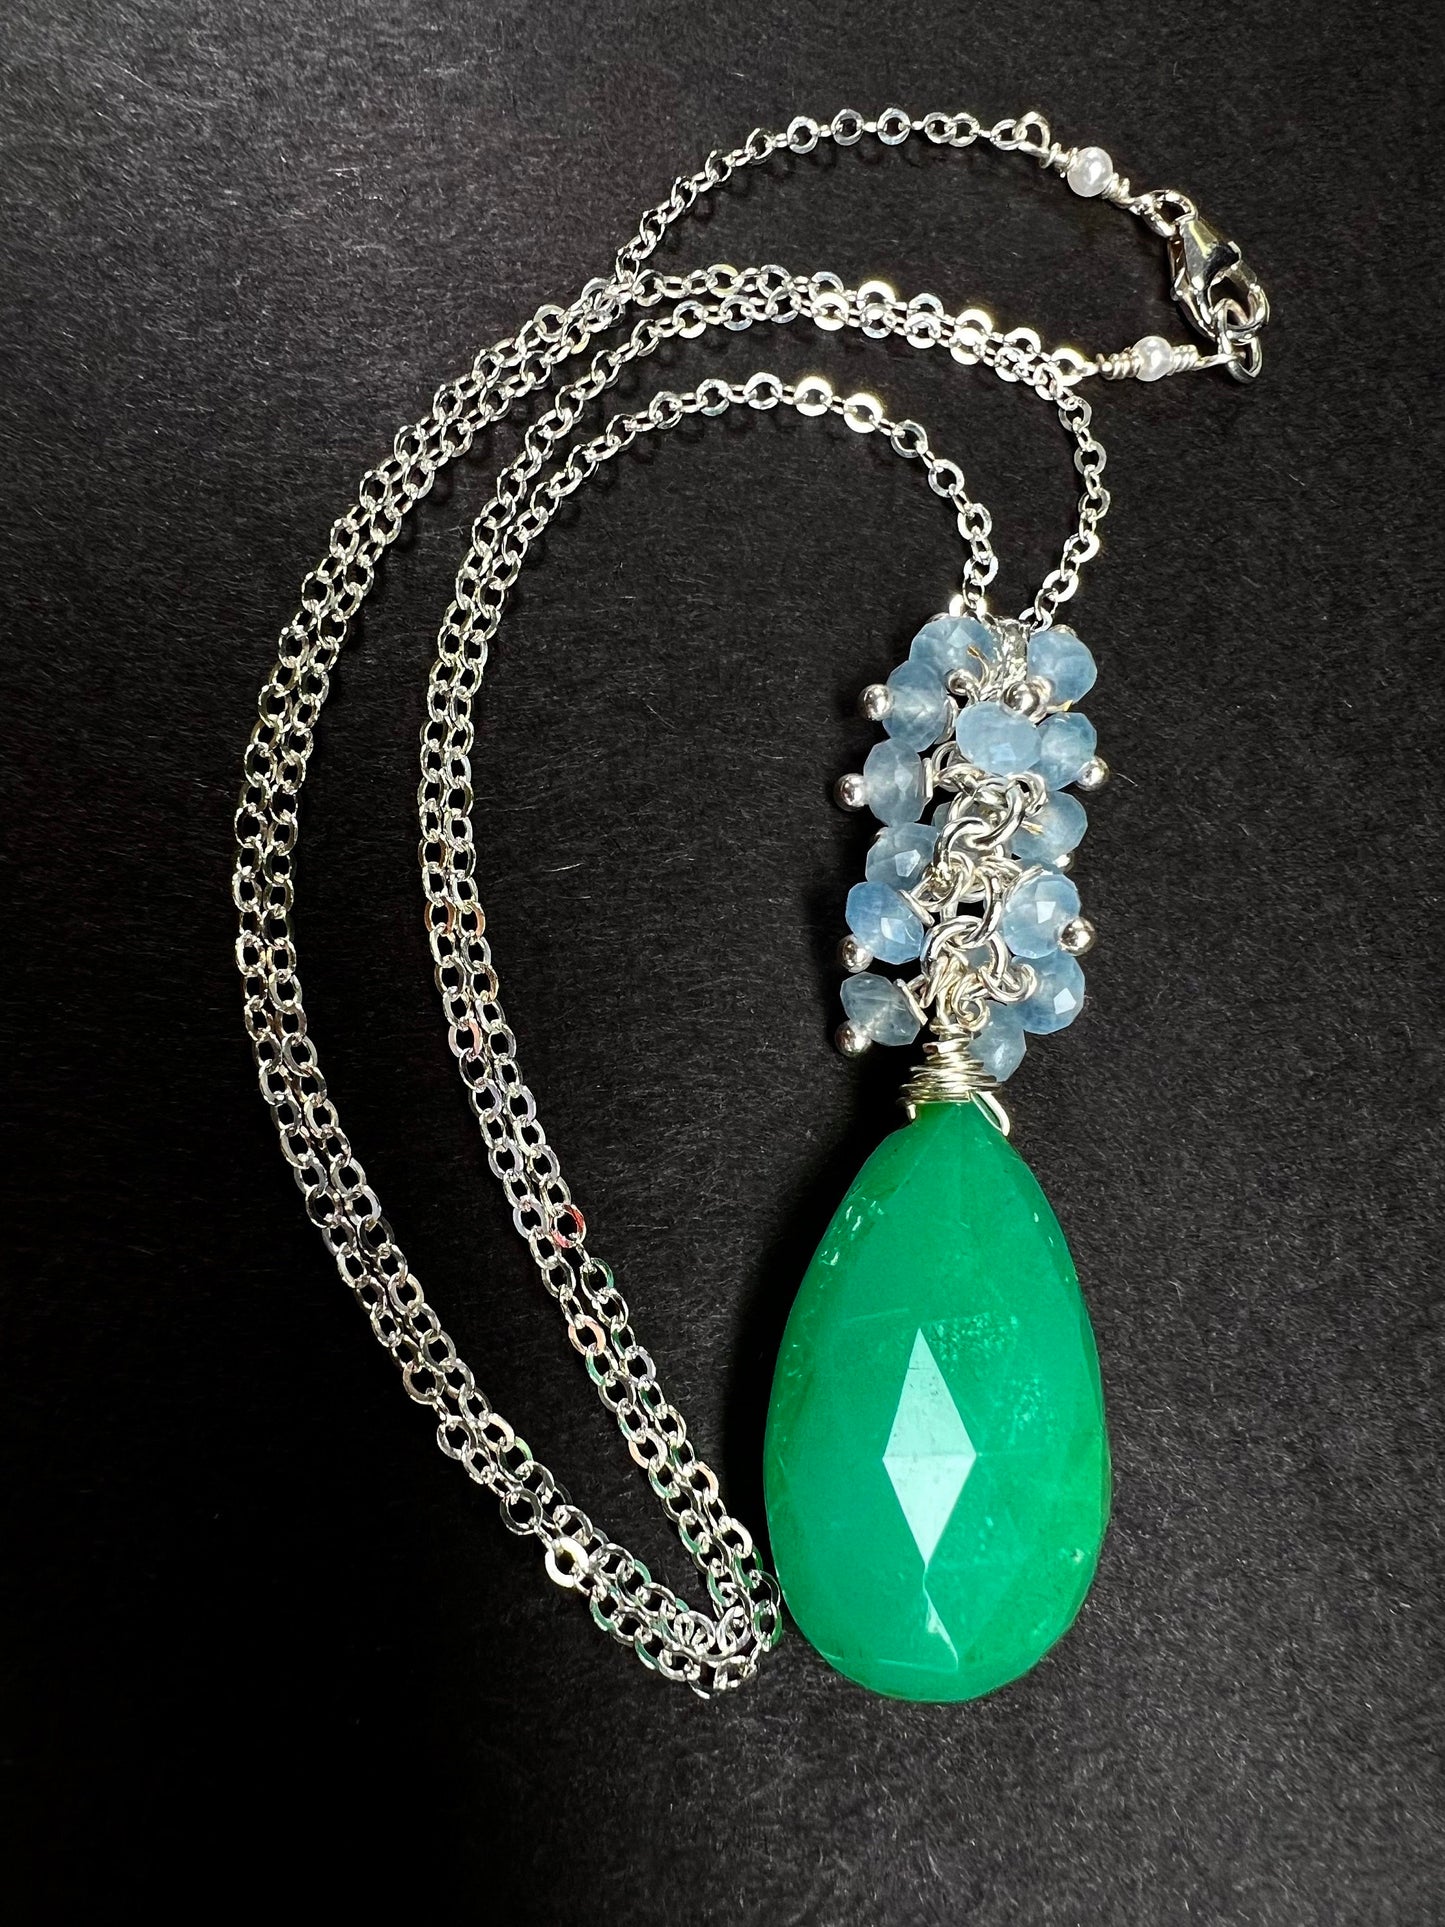 Natural Chrysoprase large Teardrop 16x26mm dangling with Aquamarine clusters 925 Sterling Silver elegant necklace. Rare one of a kind drop